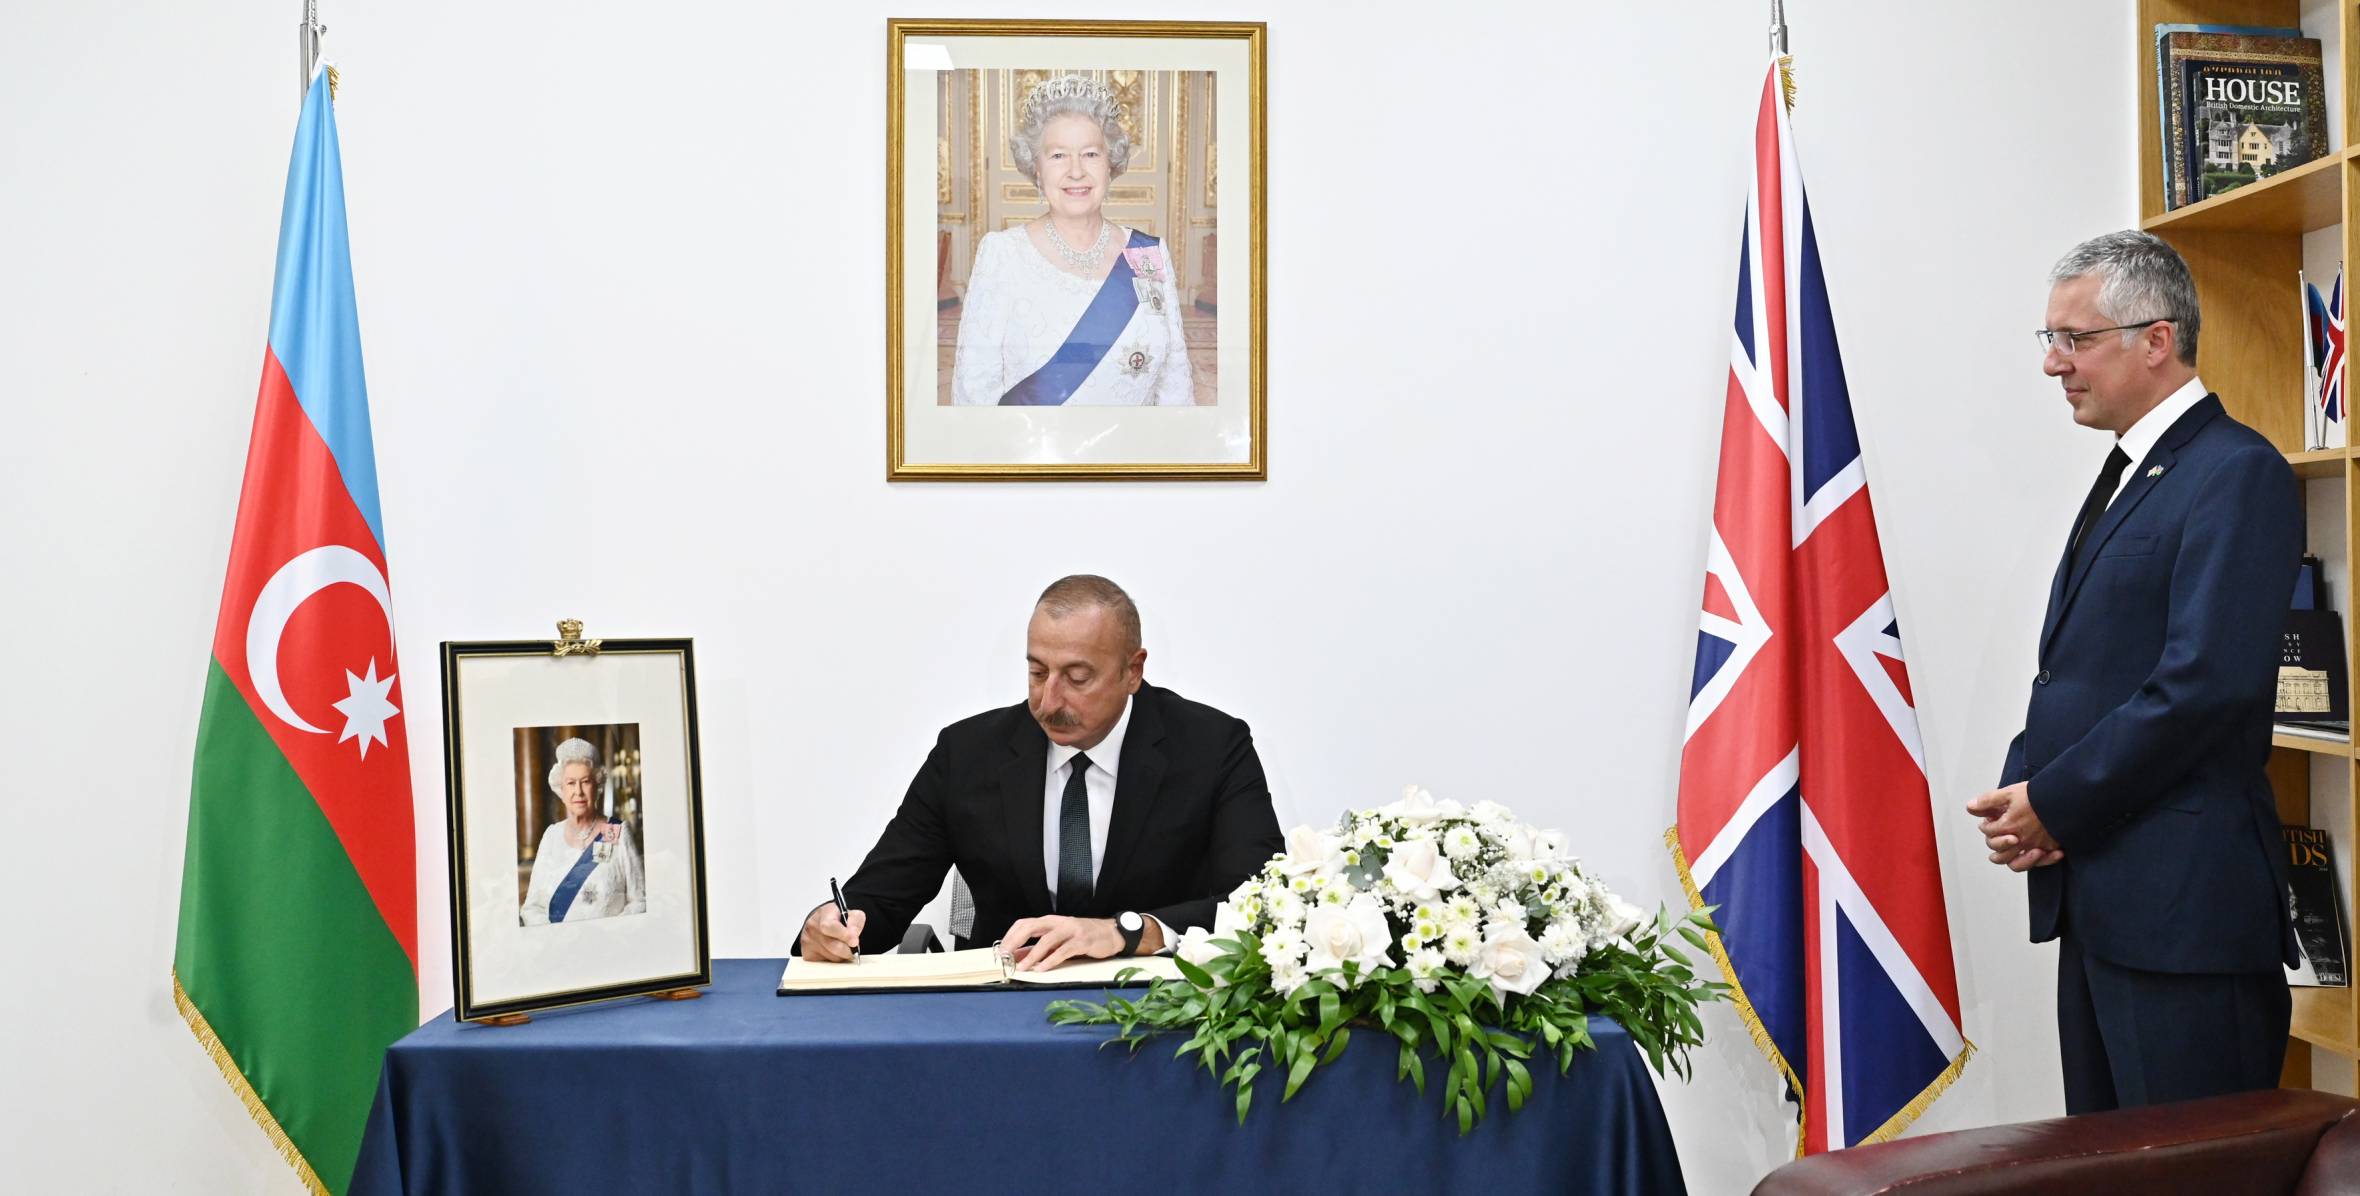 Ilham Aliyev visited UK Embassy in Azerbaijan, offered condolences over the death of Queen Elizabeth II